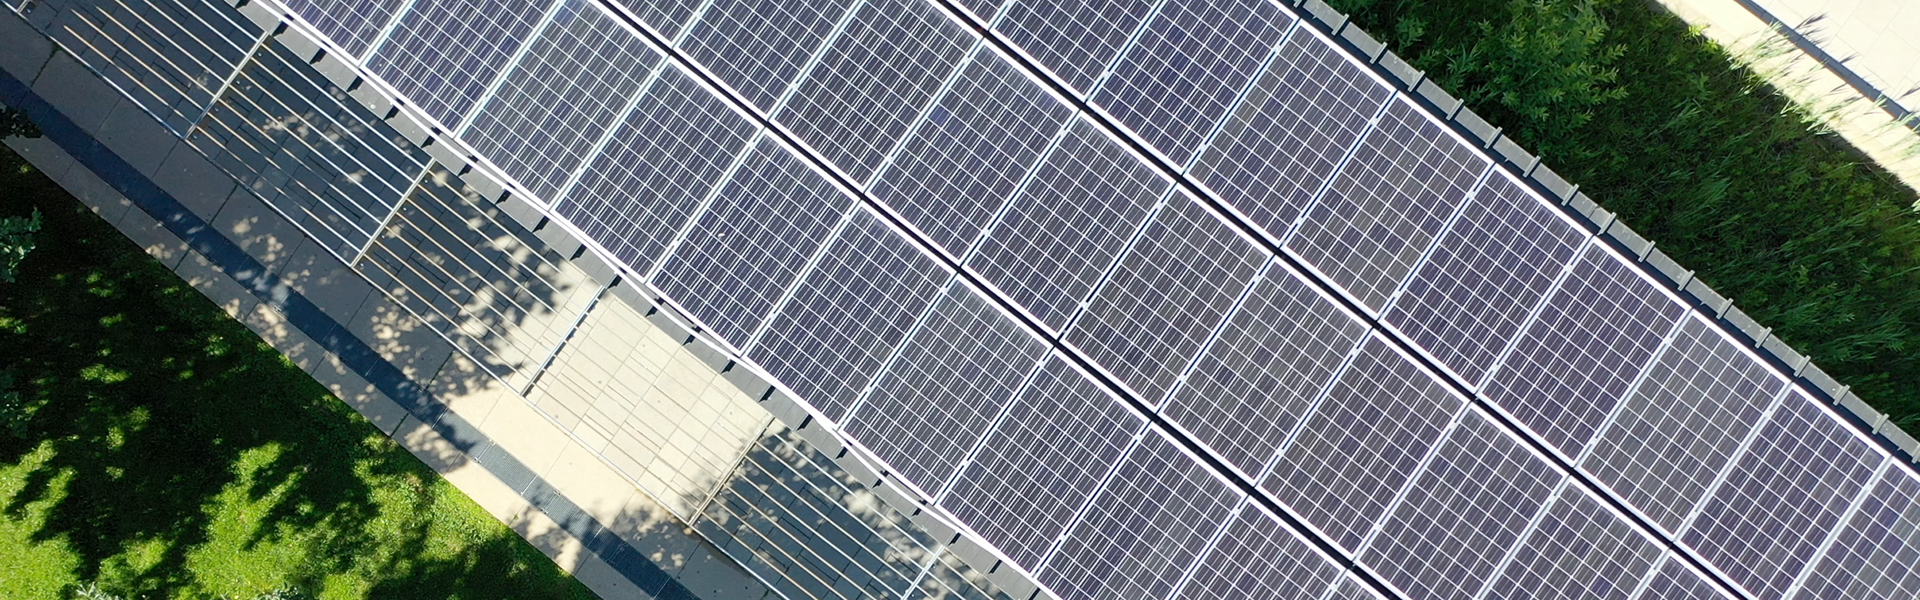 Aerial view of solar panels in Polonsky Commons